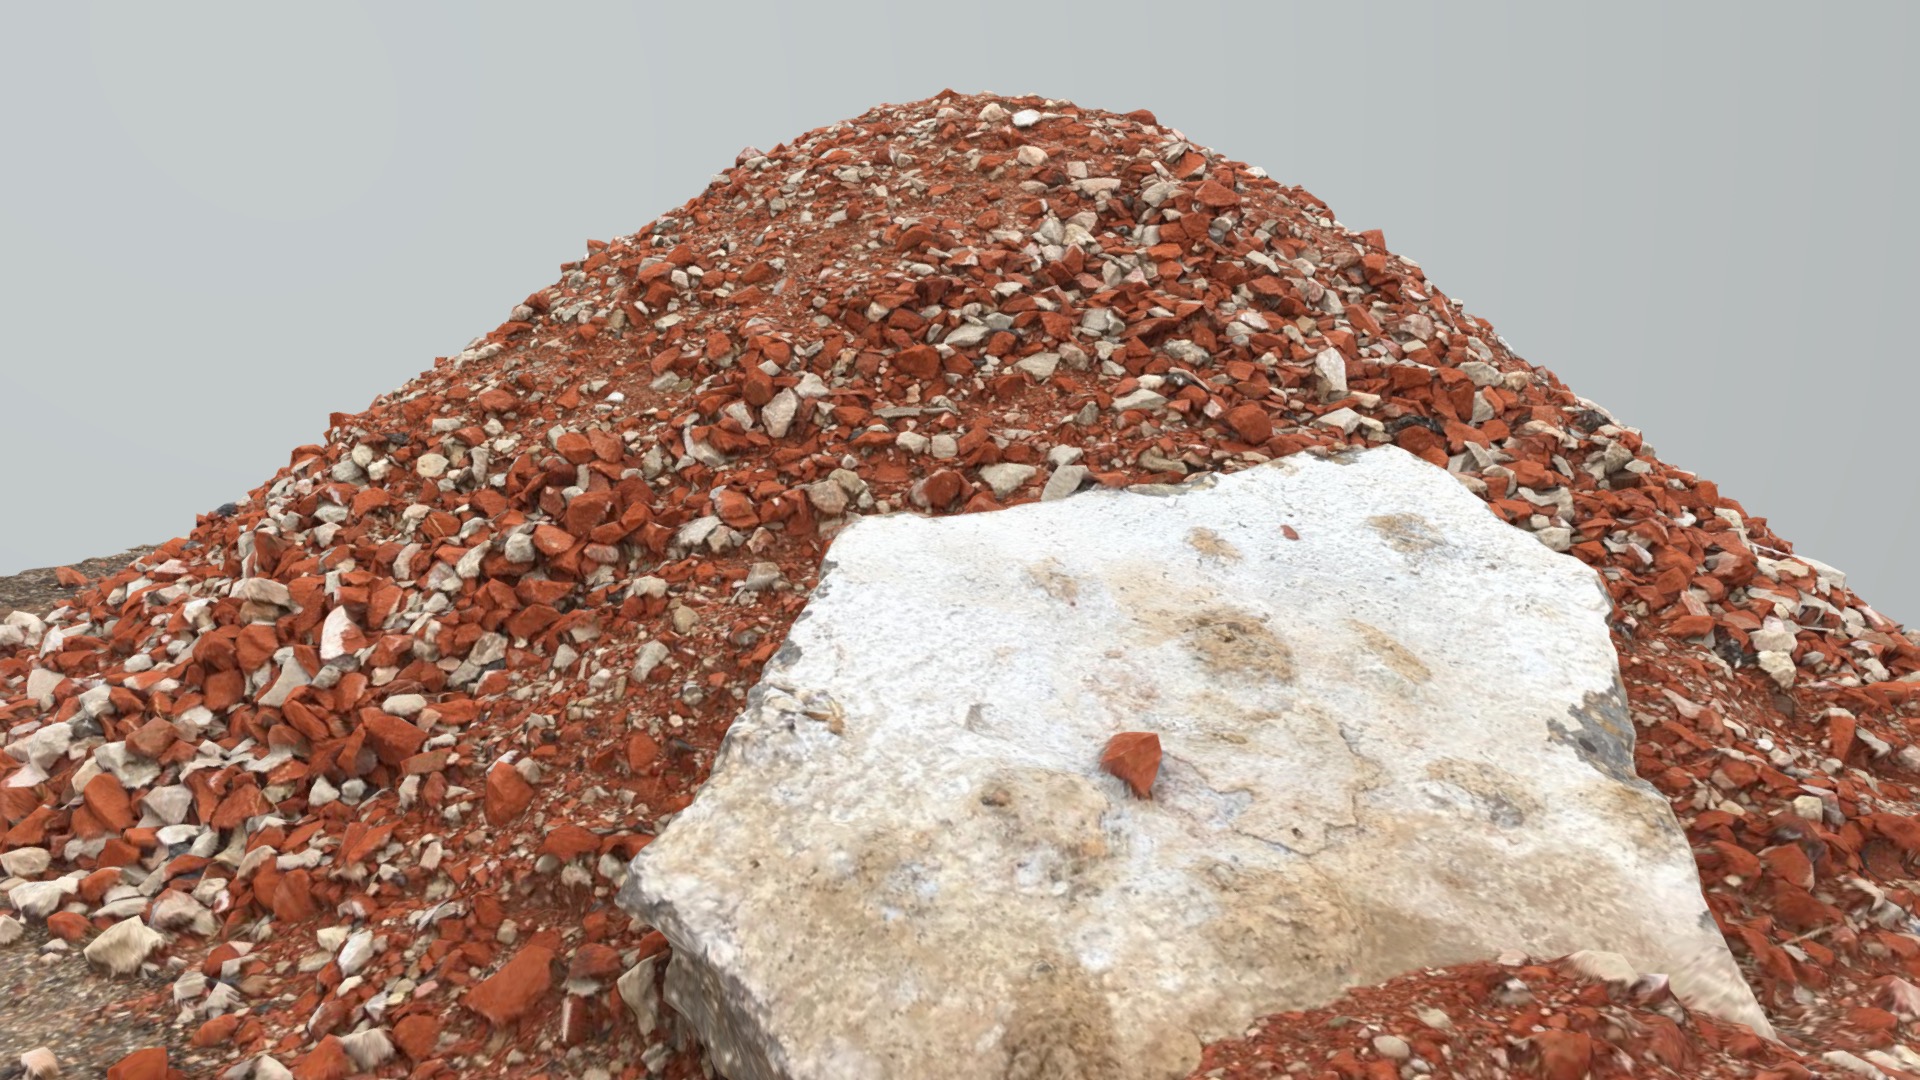 3D model rock debris pile 1 - This is a 3D model of the rock debris pile 1. The 3D model is about a pile of red and white rocks.